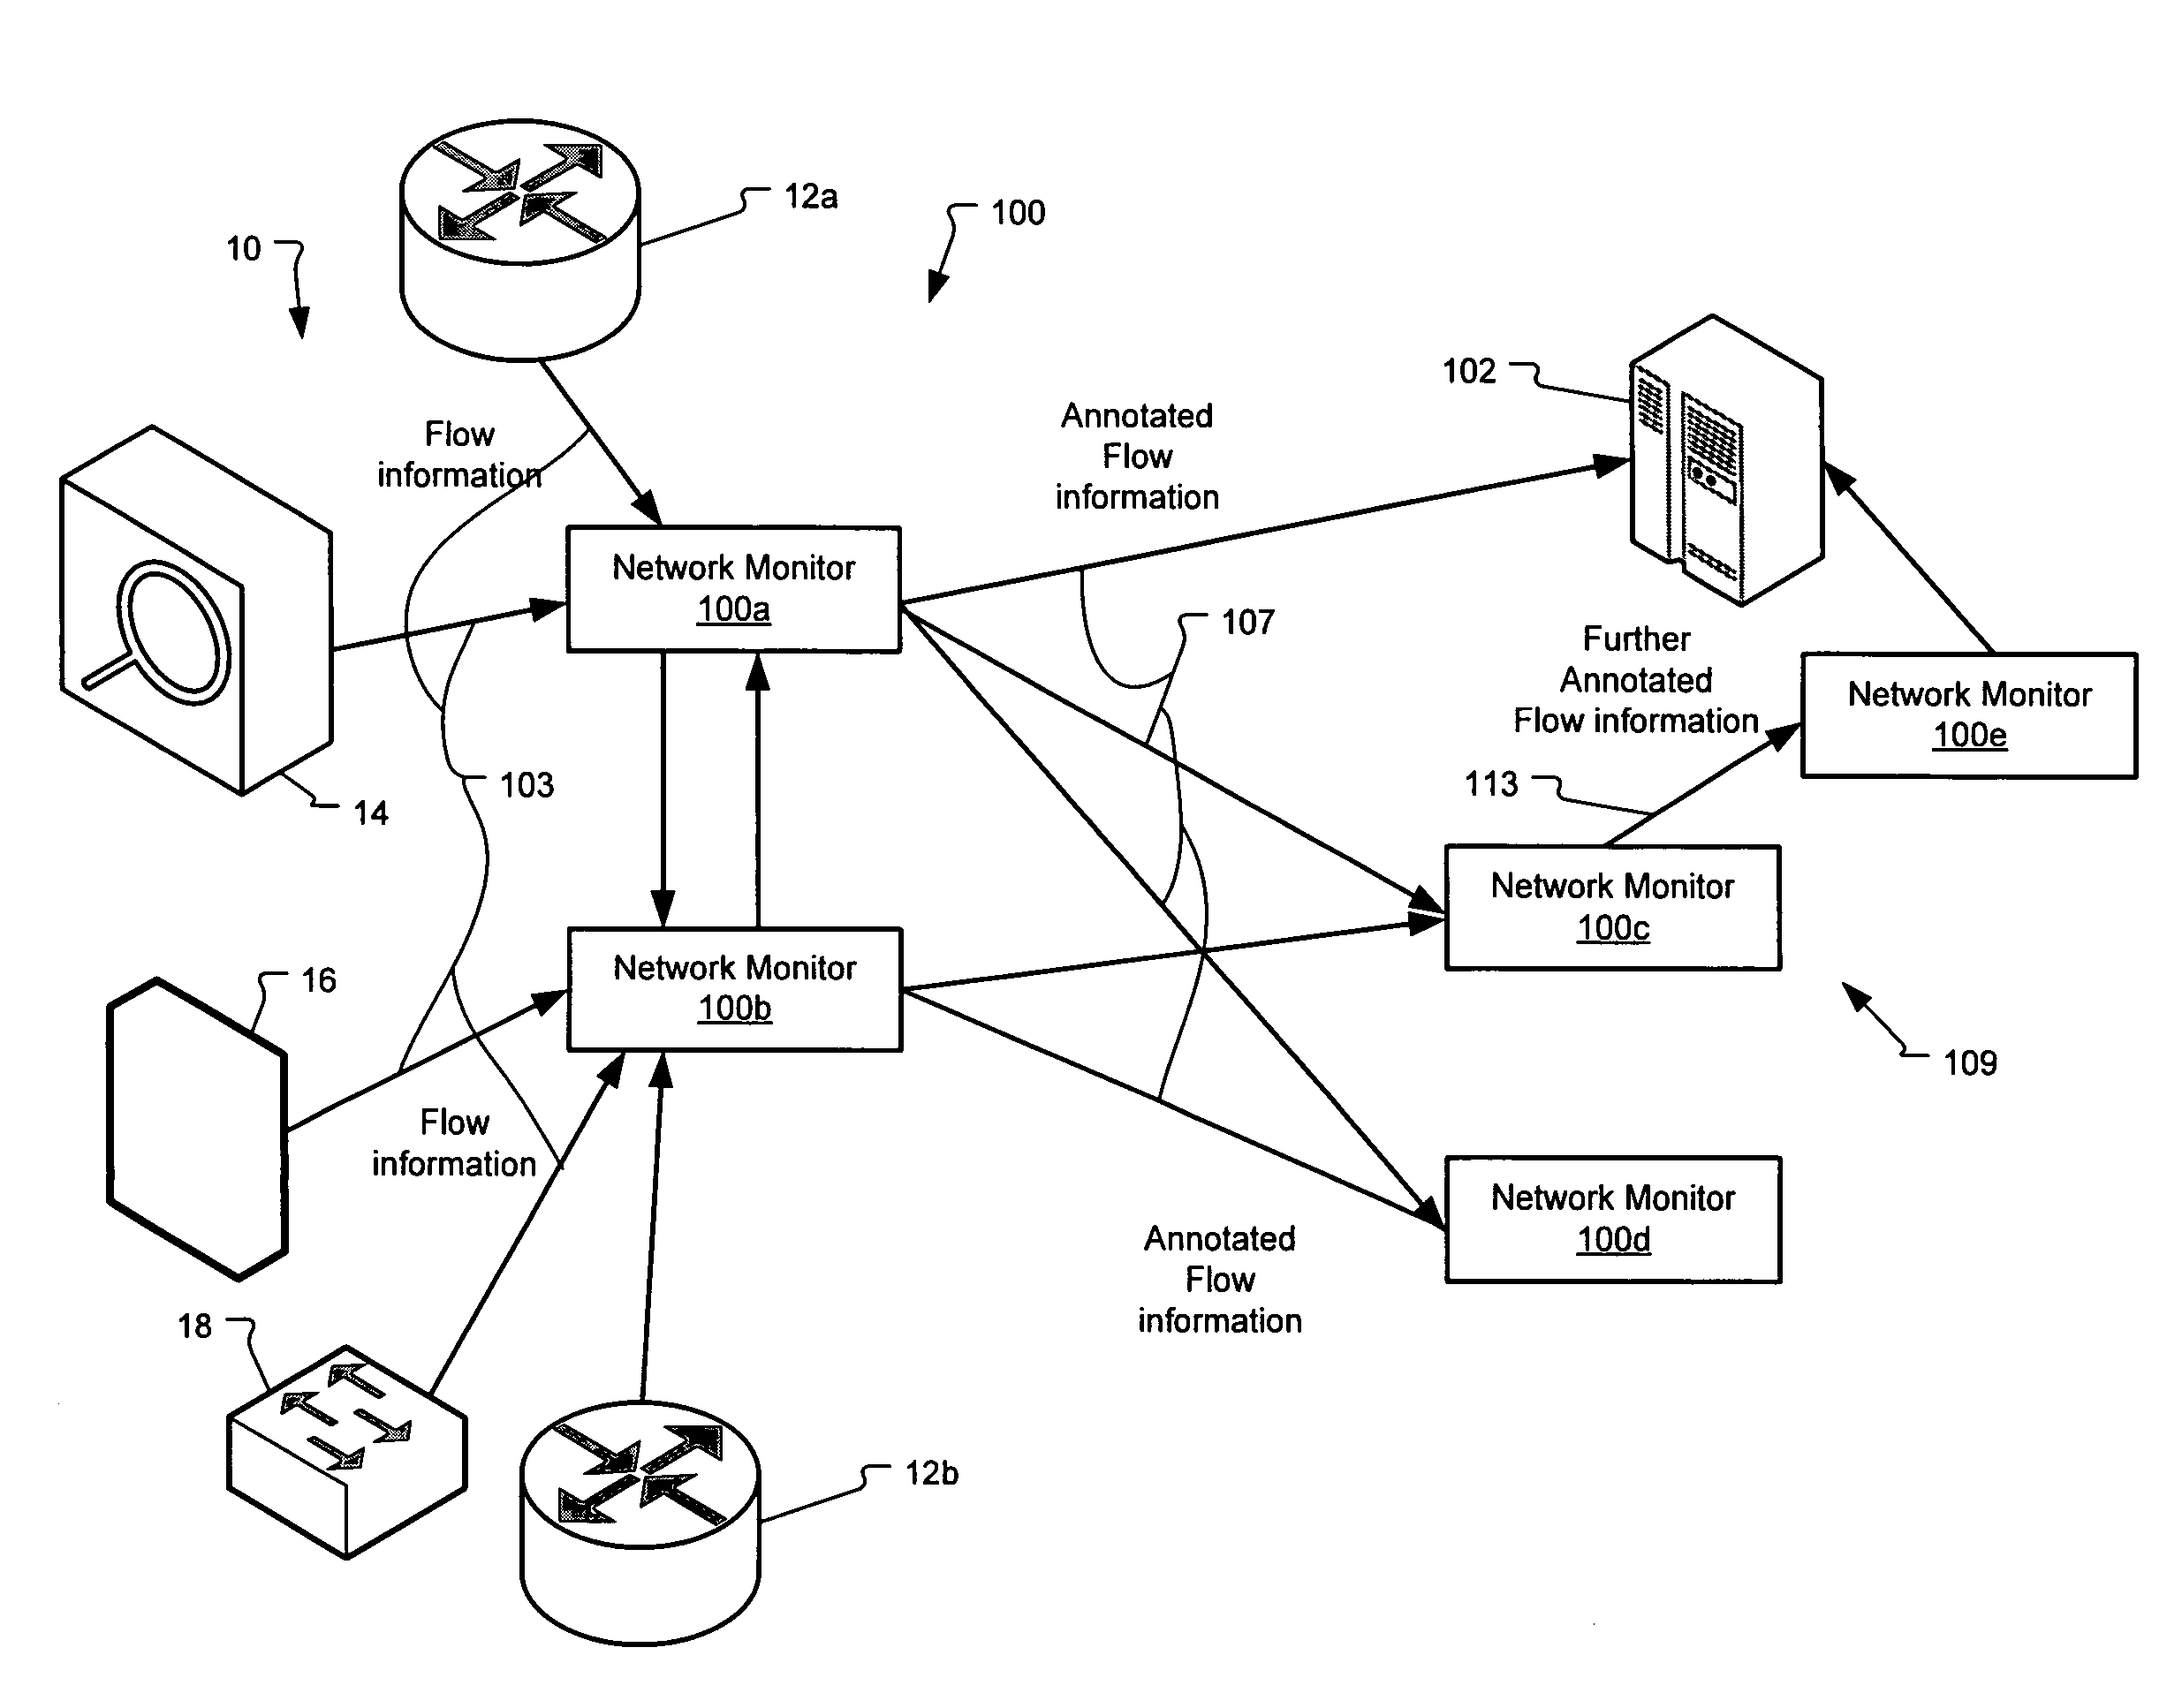 Method and System for Annotating Network Flow Information